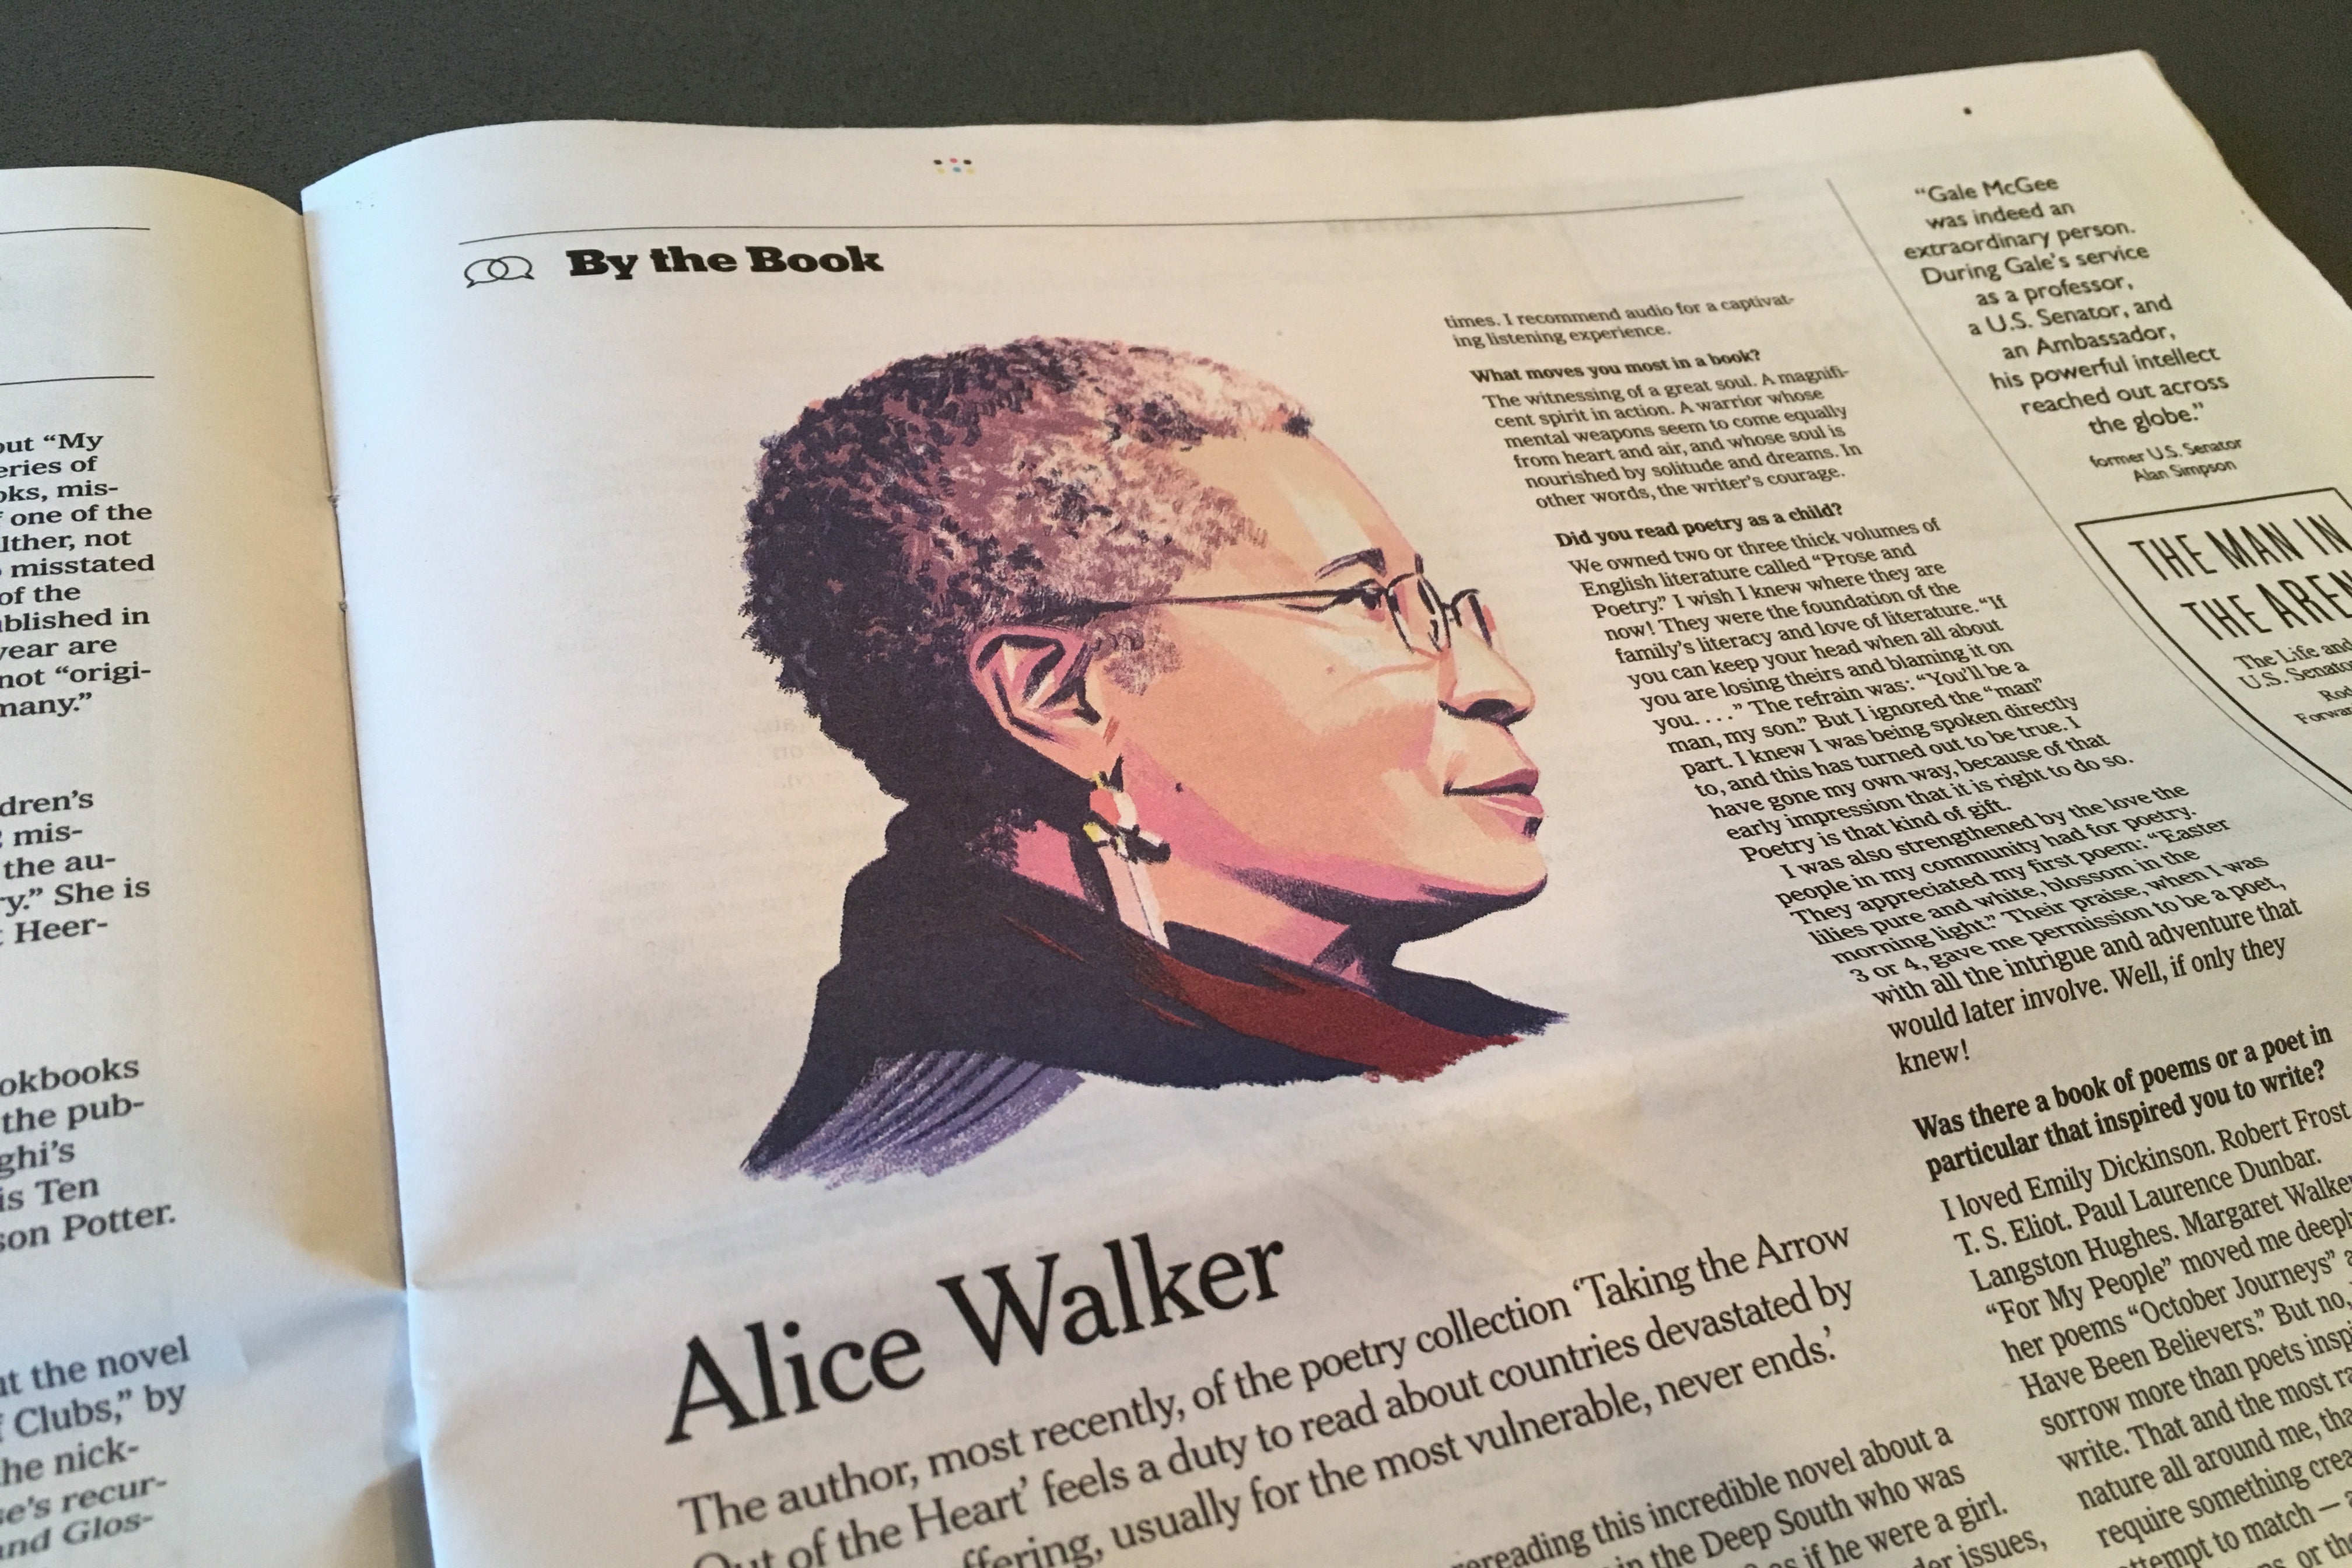 The New York Times Book Review "By the Book" interview with Alice Walker.